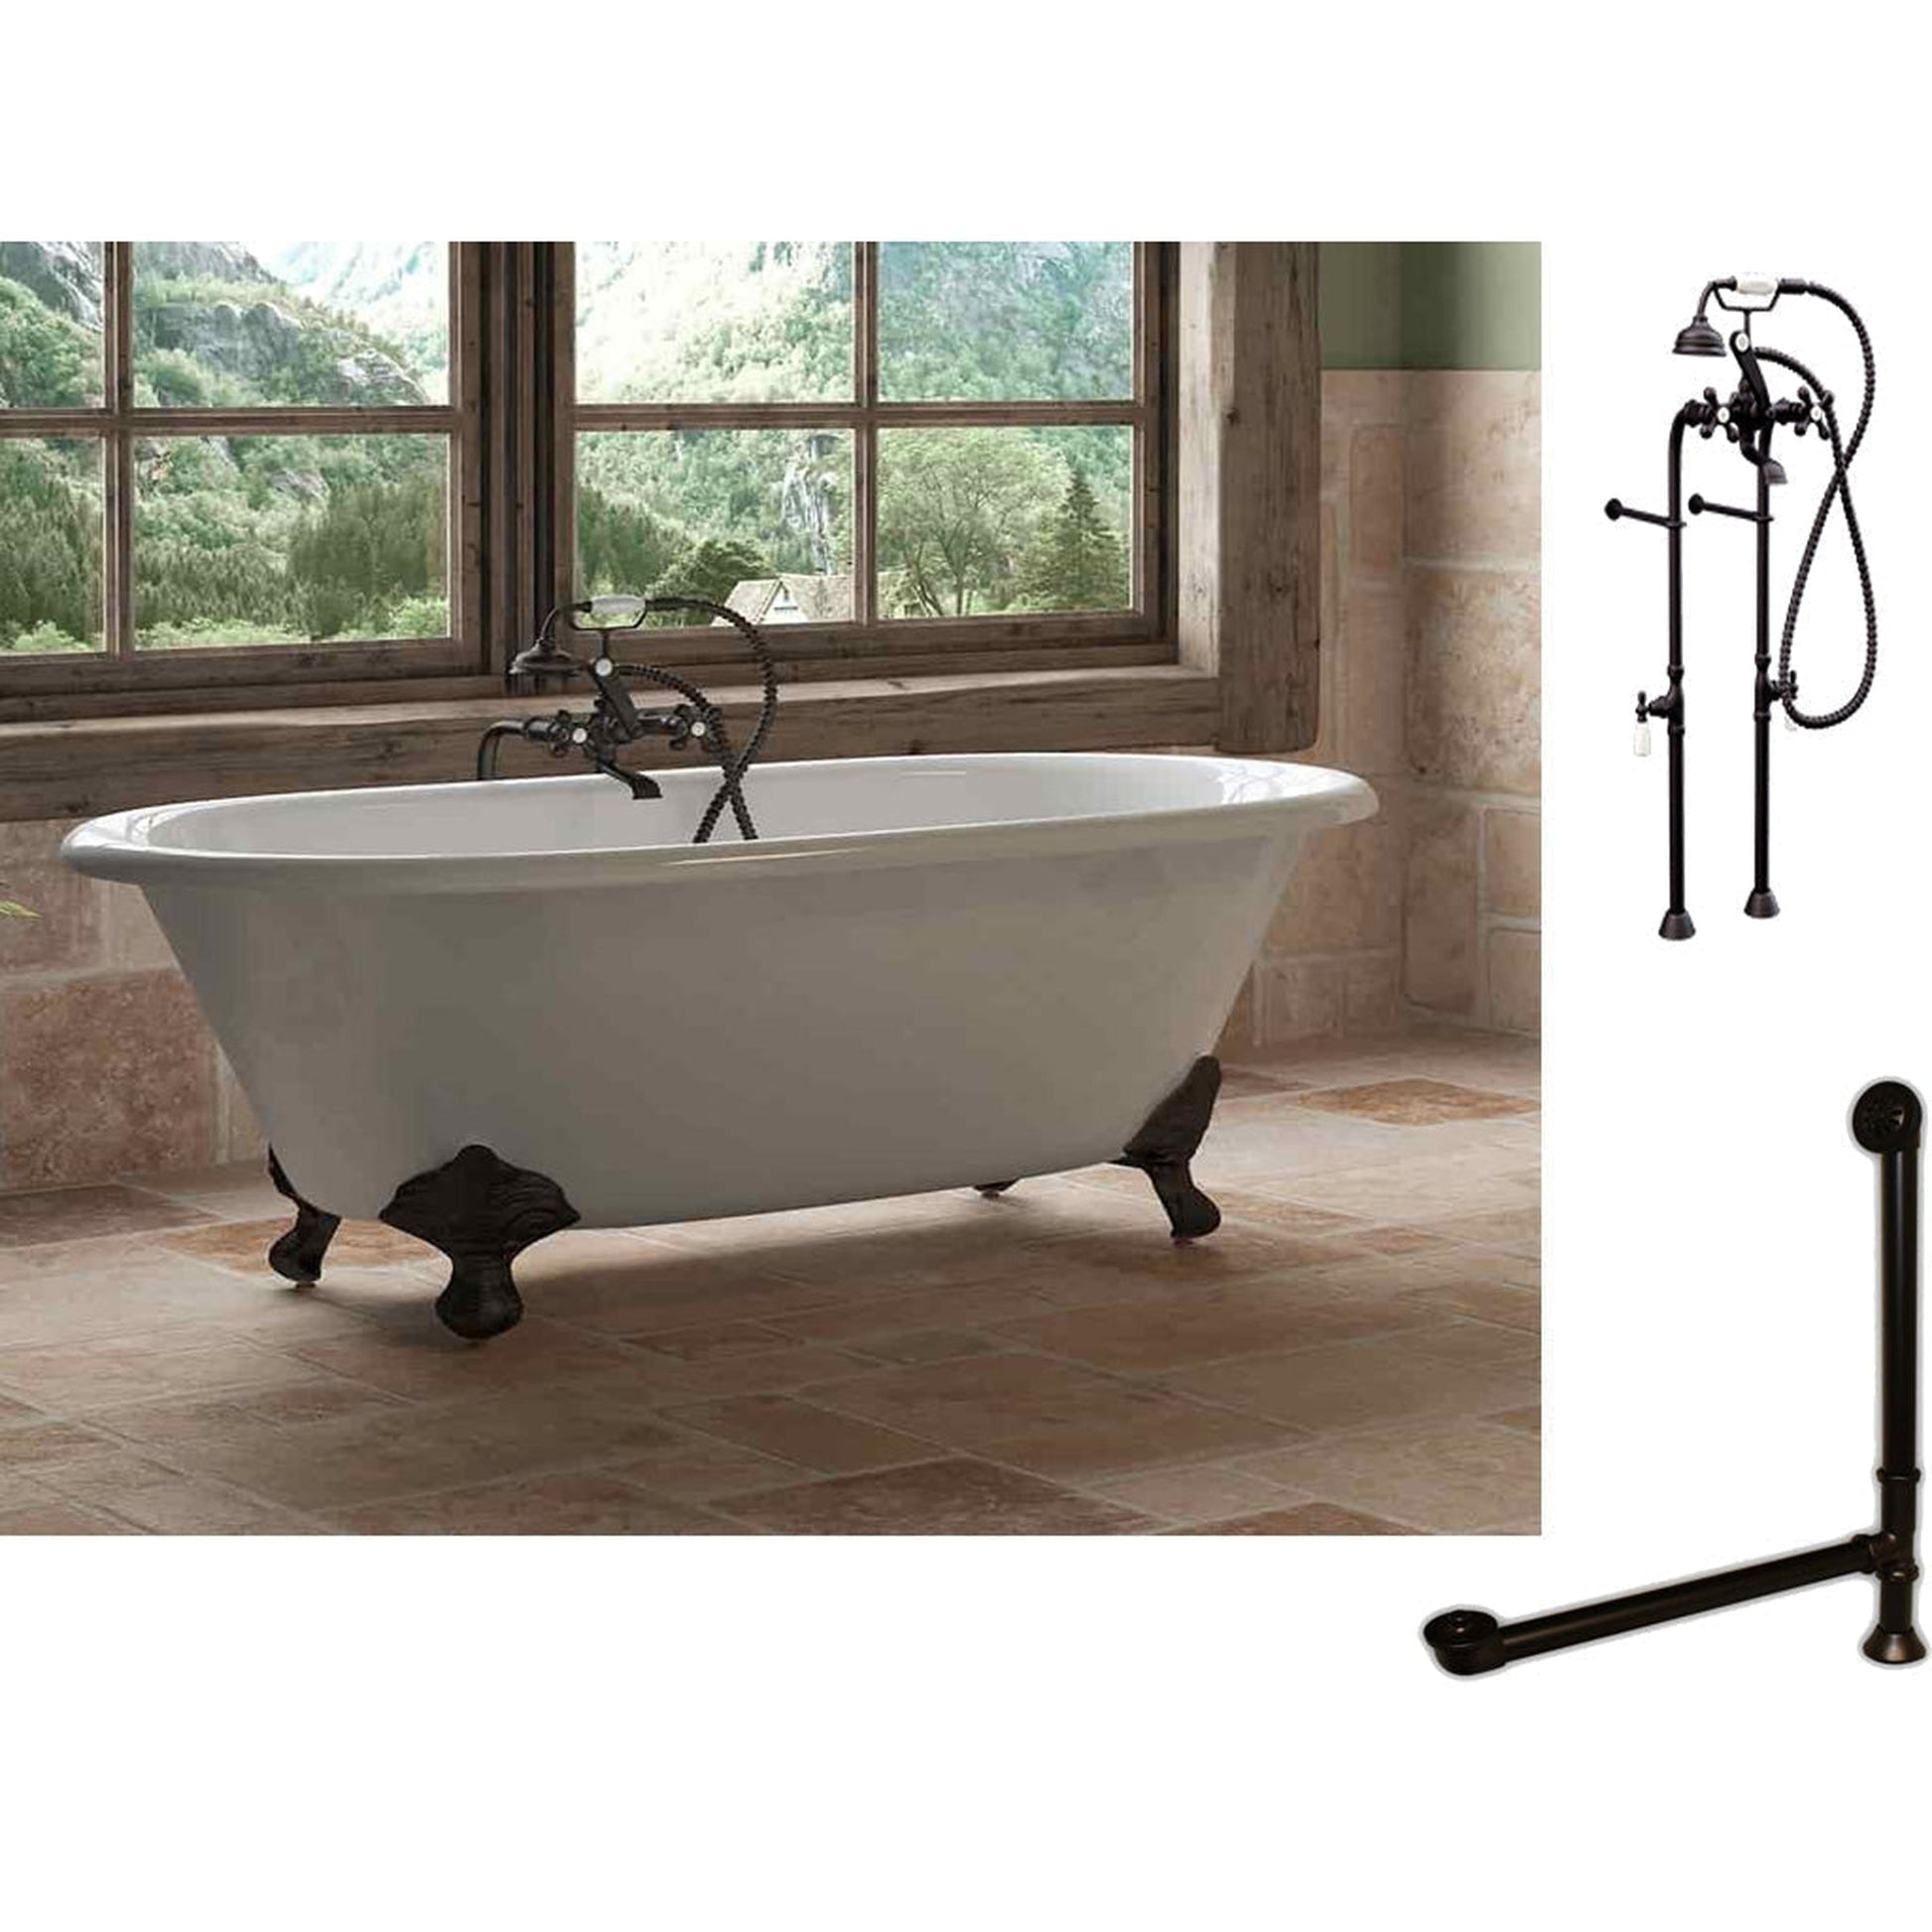 Cambridge Plumbing 60" White Cast Iron Double Ended Clawfoot Bathtub With No Deck Holes And Complete Plumbing Package Including Modern Floor Mounted British Telephone Faucet, Drain And Overflow Assembly In Oil Rubbed Bronze